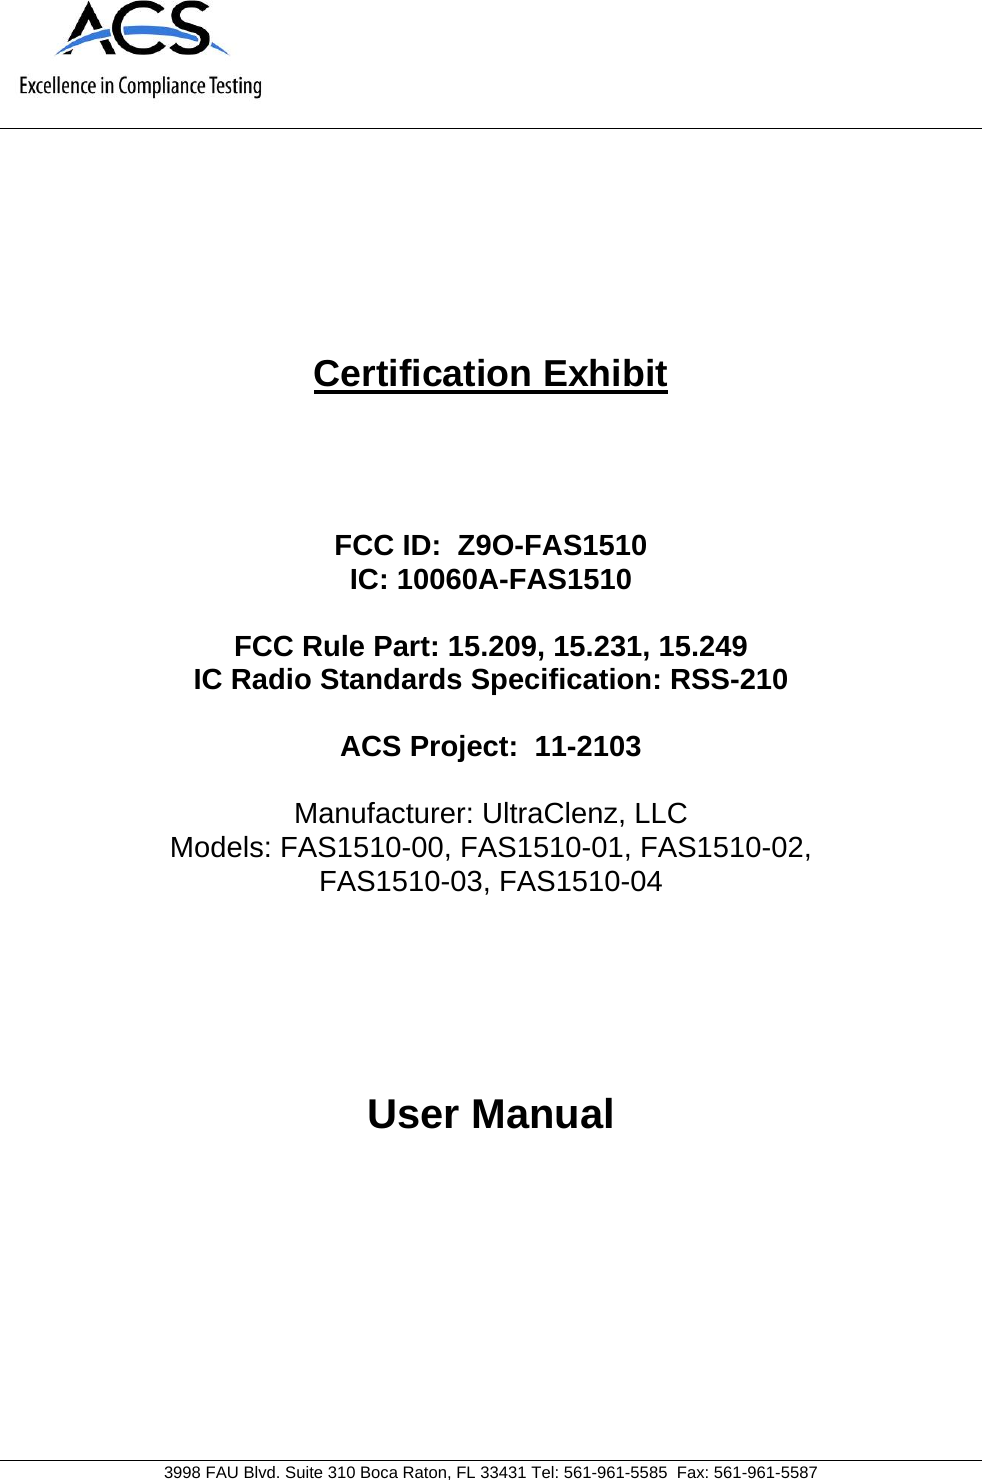     3998 FAU Blvd. Suite 310 Boca Raton, FL 33431 Tel: 561-961-5585  Fax: 561-961-5587 Certification Exhibit     FCC ID:  Z9O-FAS1510 IC: 10060A-FAS1510  FCC Rule Part: 15.209, 15.231, 15.249 IC Radio Standards Specification: RSS-210  ACS Project:  11-2103   Manufacturer: UltraClenz, LLC Models: FAS1510-00, FAS1510-01, FAS1510-02,  FAS1510-03, FAS1510-04     User Manual   